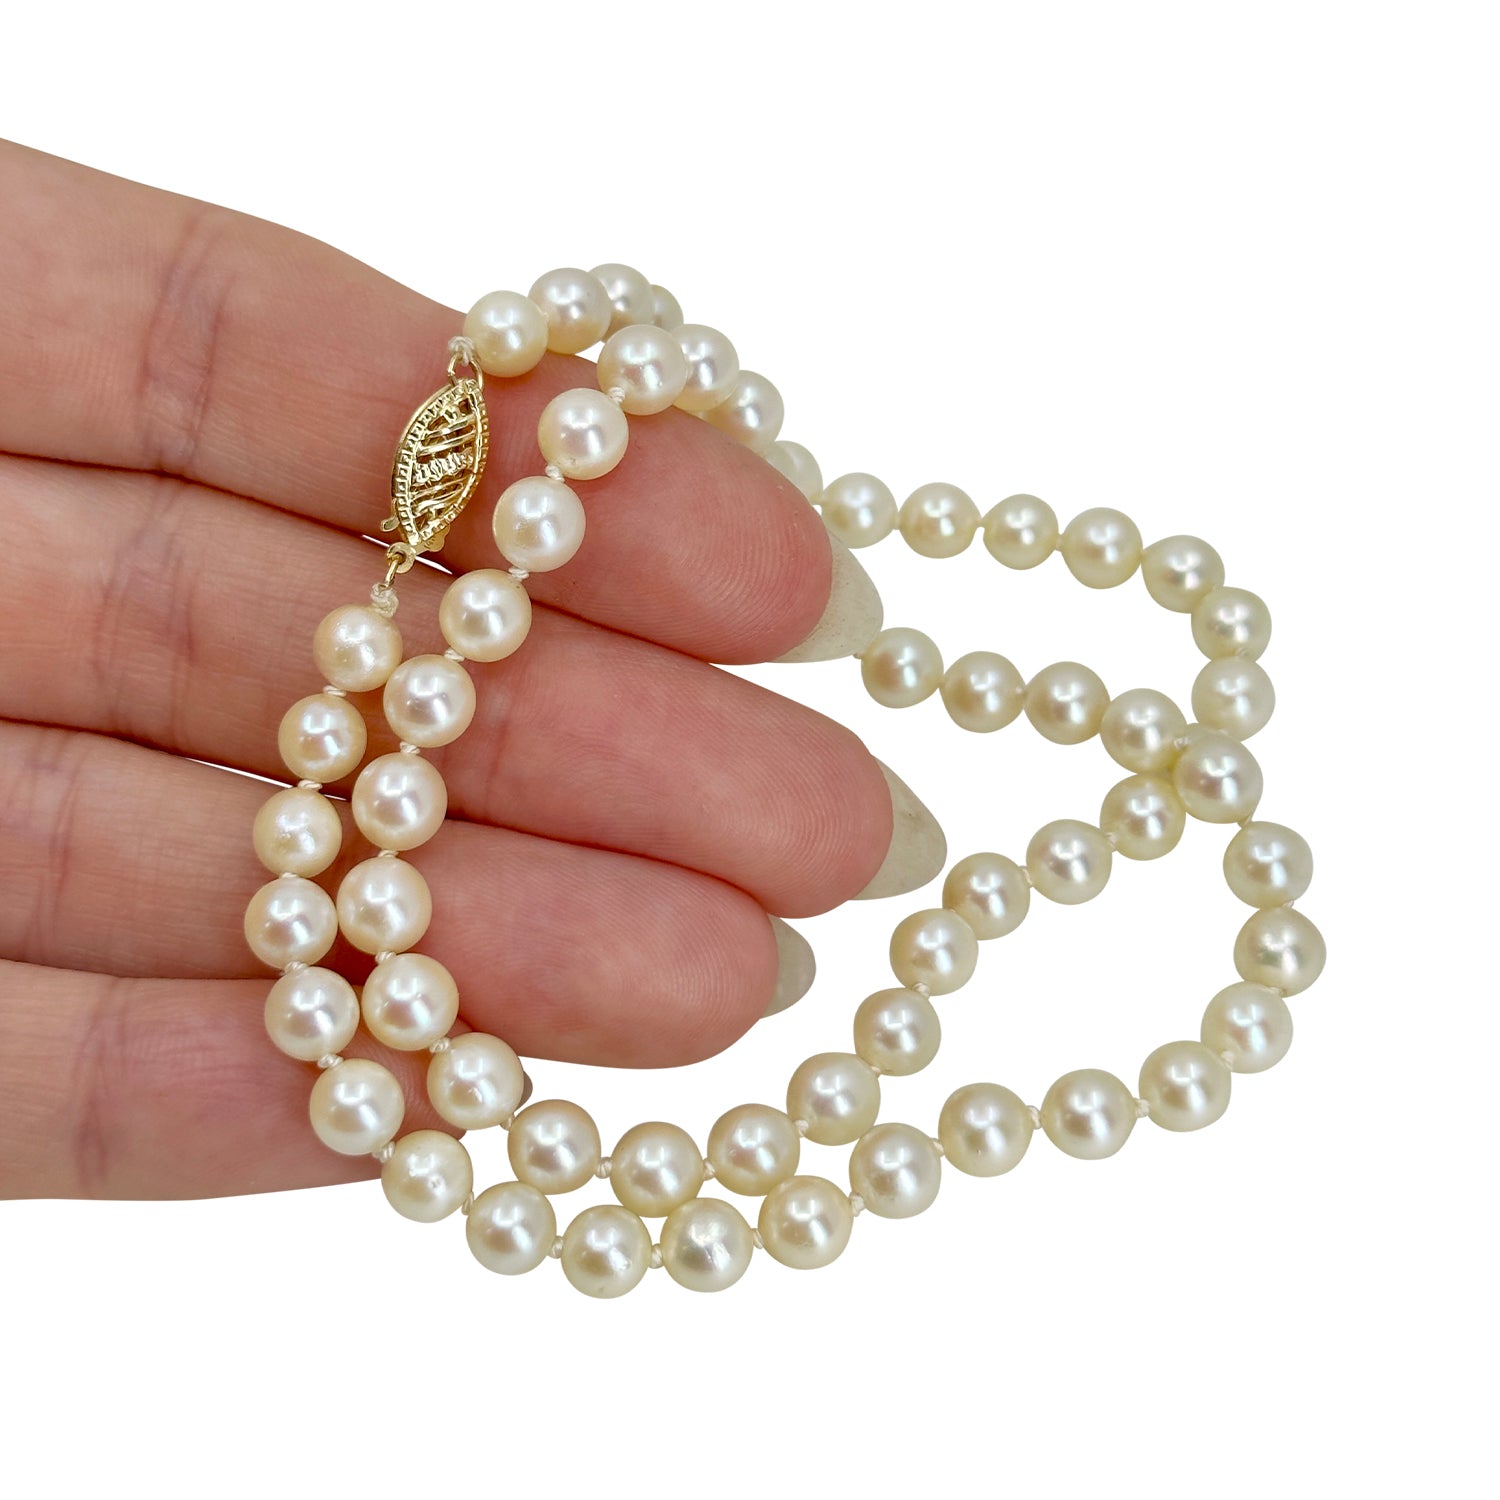 Vintage Choker Japanese Saltwater Akoya Cultured Pearl Necklace - 14K Yellow Gold 15.75 Inch